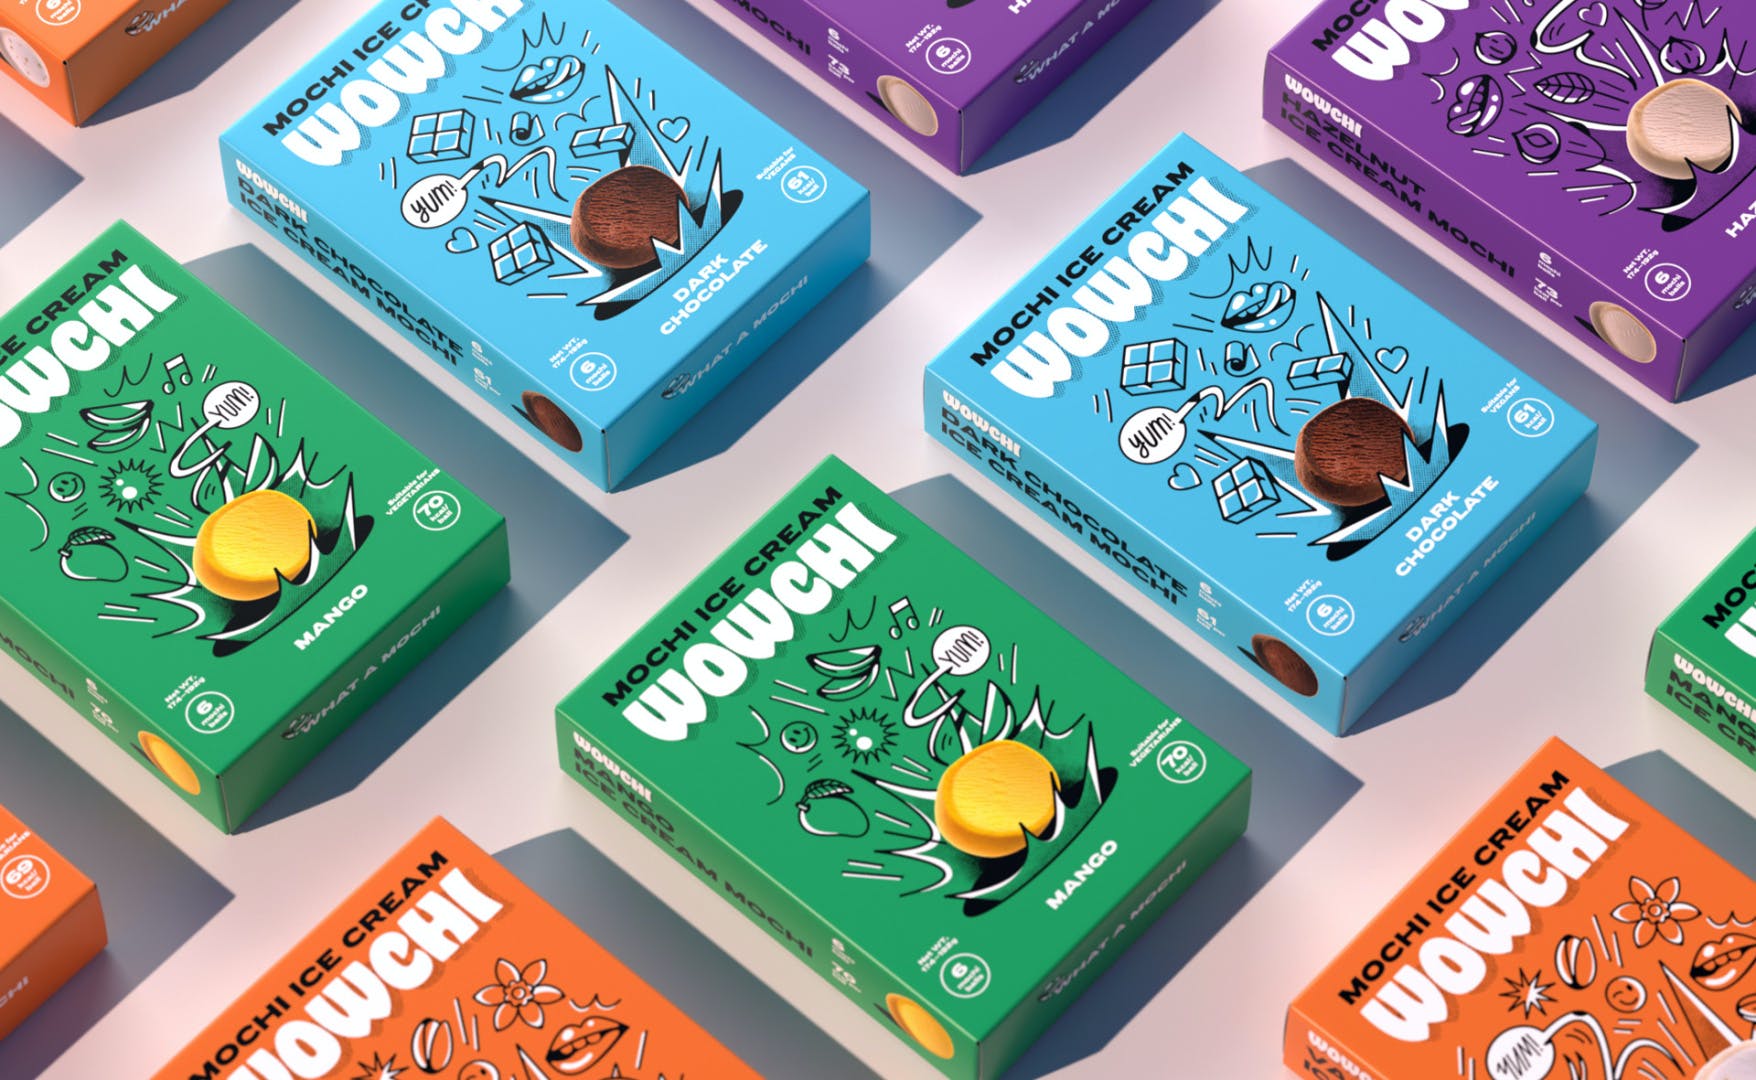 Image shows rows of boxes of Wowchi mochi in green, orange, blue and purple packaging with line illustrations and mochi balls on the front